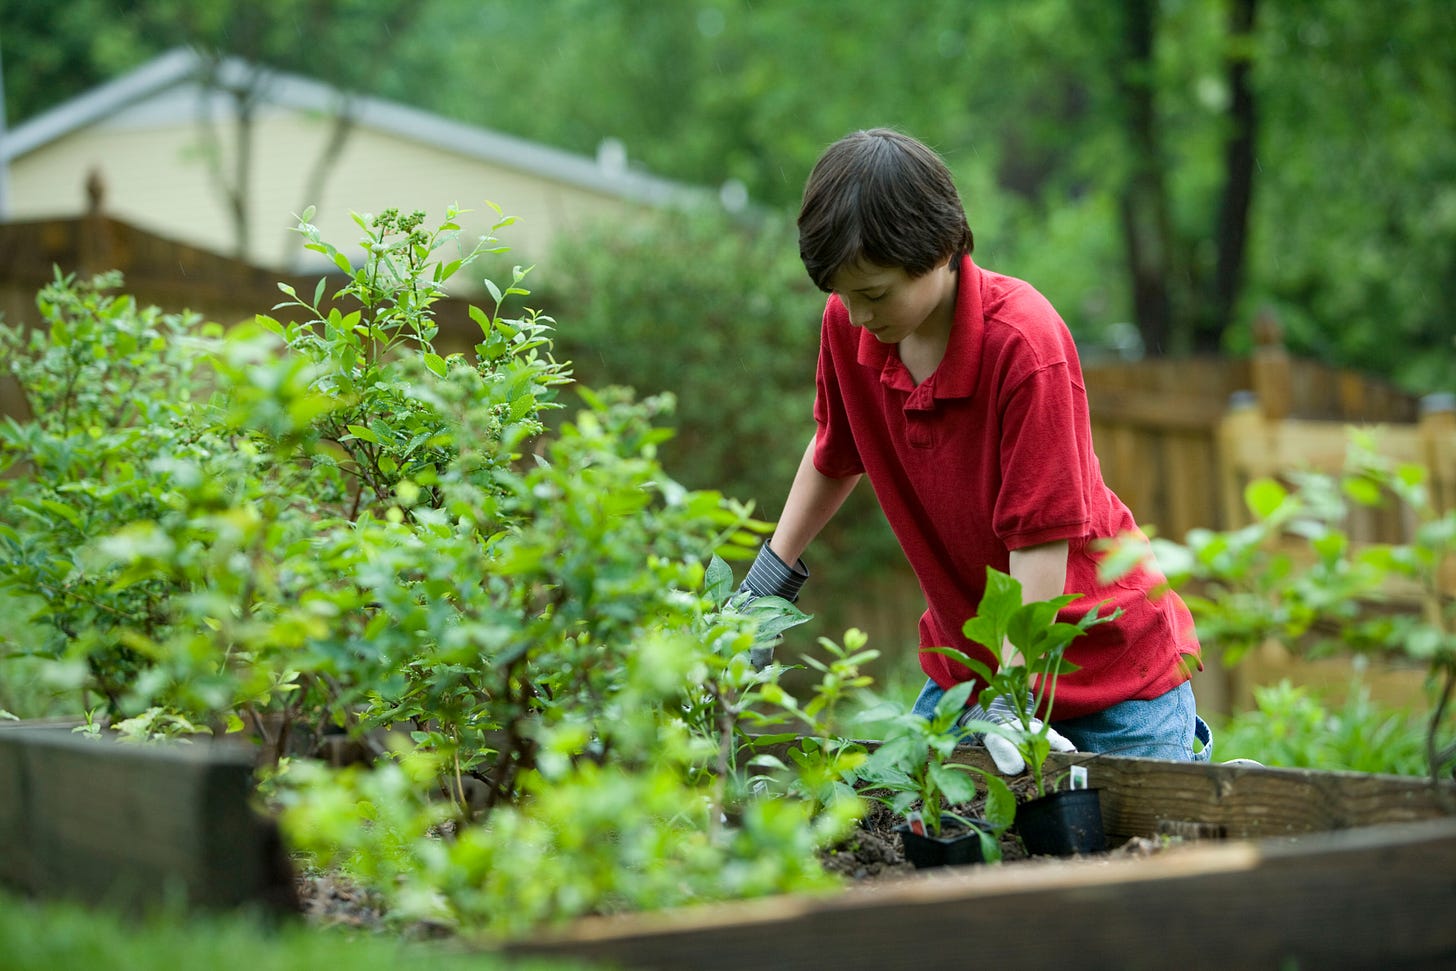 While wearing protective gloves, this boy enjoys the fresh outdoor air as he plants what appears to be vegetables in his raised-bed home garden.